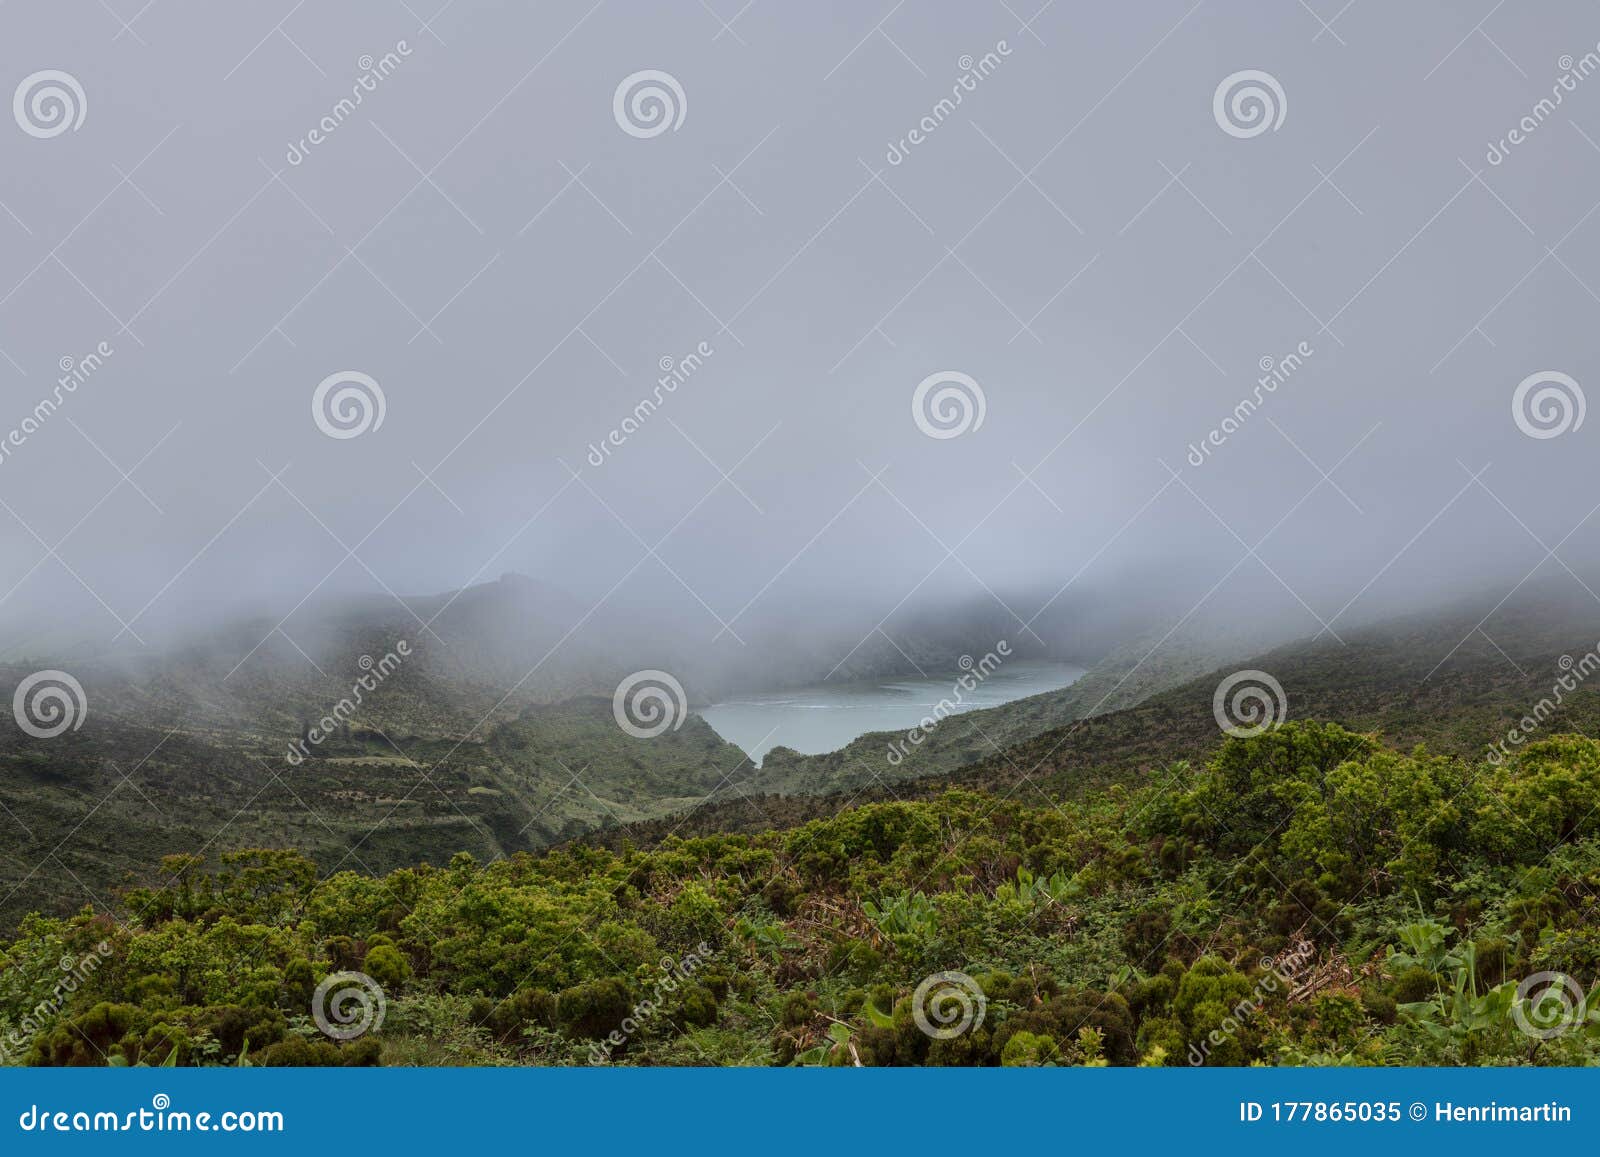 landscape of low clouds and bad weather over lagoa funda das lajes caldera volcanic crater lake at ilha das flores island in the